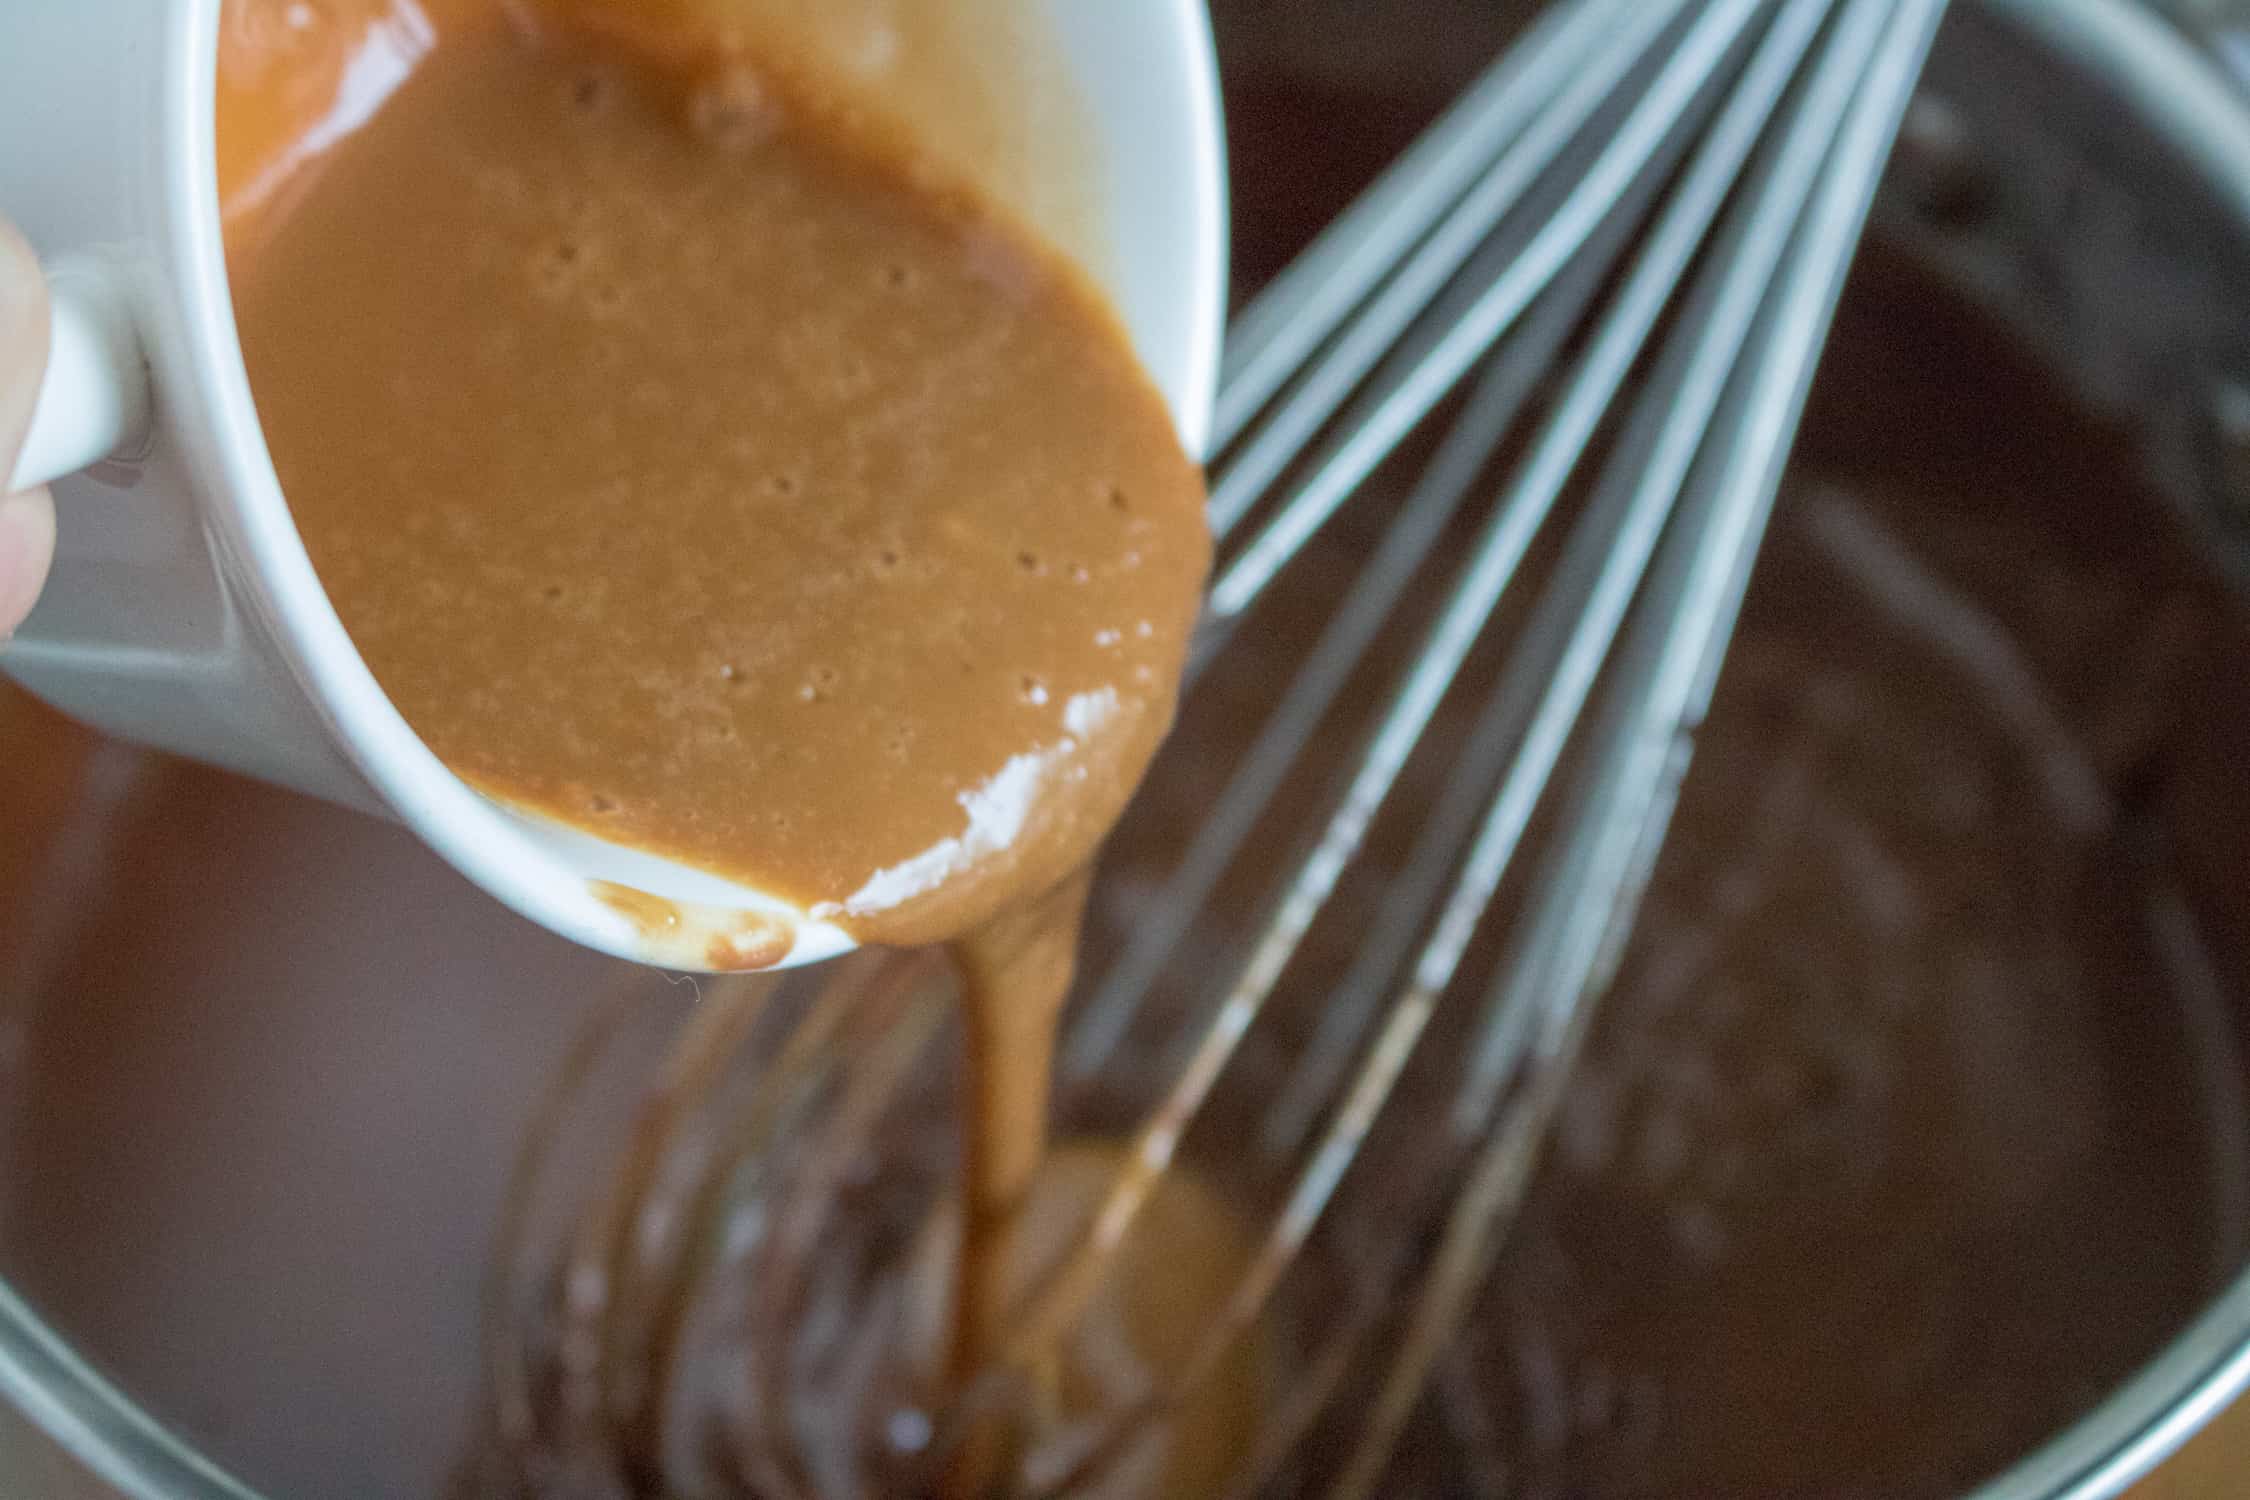 A small portion of chocolate mixture mixed in with the egg yolks being poured into the sauce pan with the chocolate cream pie filling